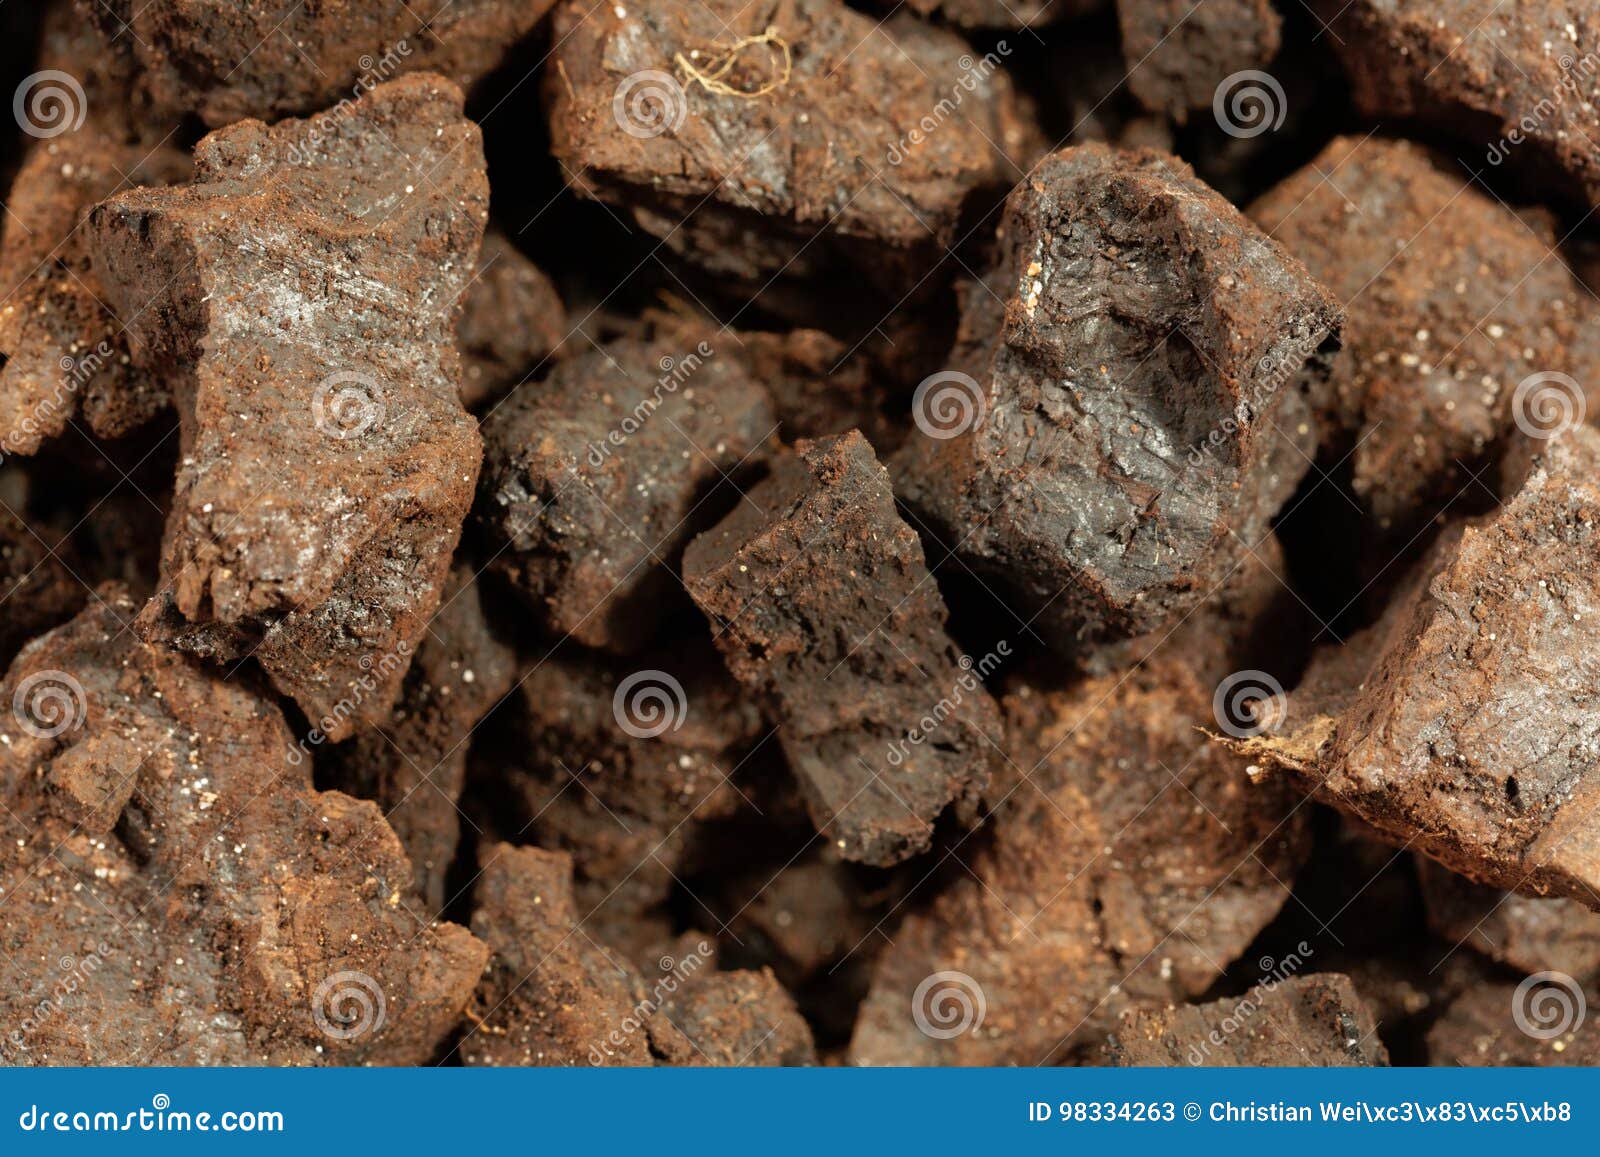 Pieces Of Lignite Or Brown Coal From A Mine In Germany. Stock